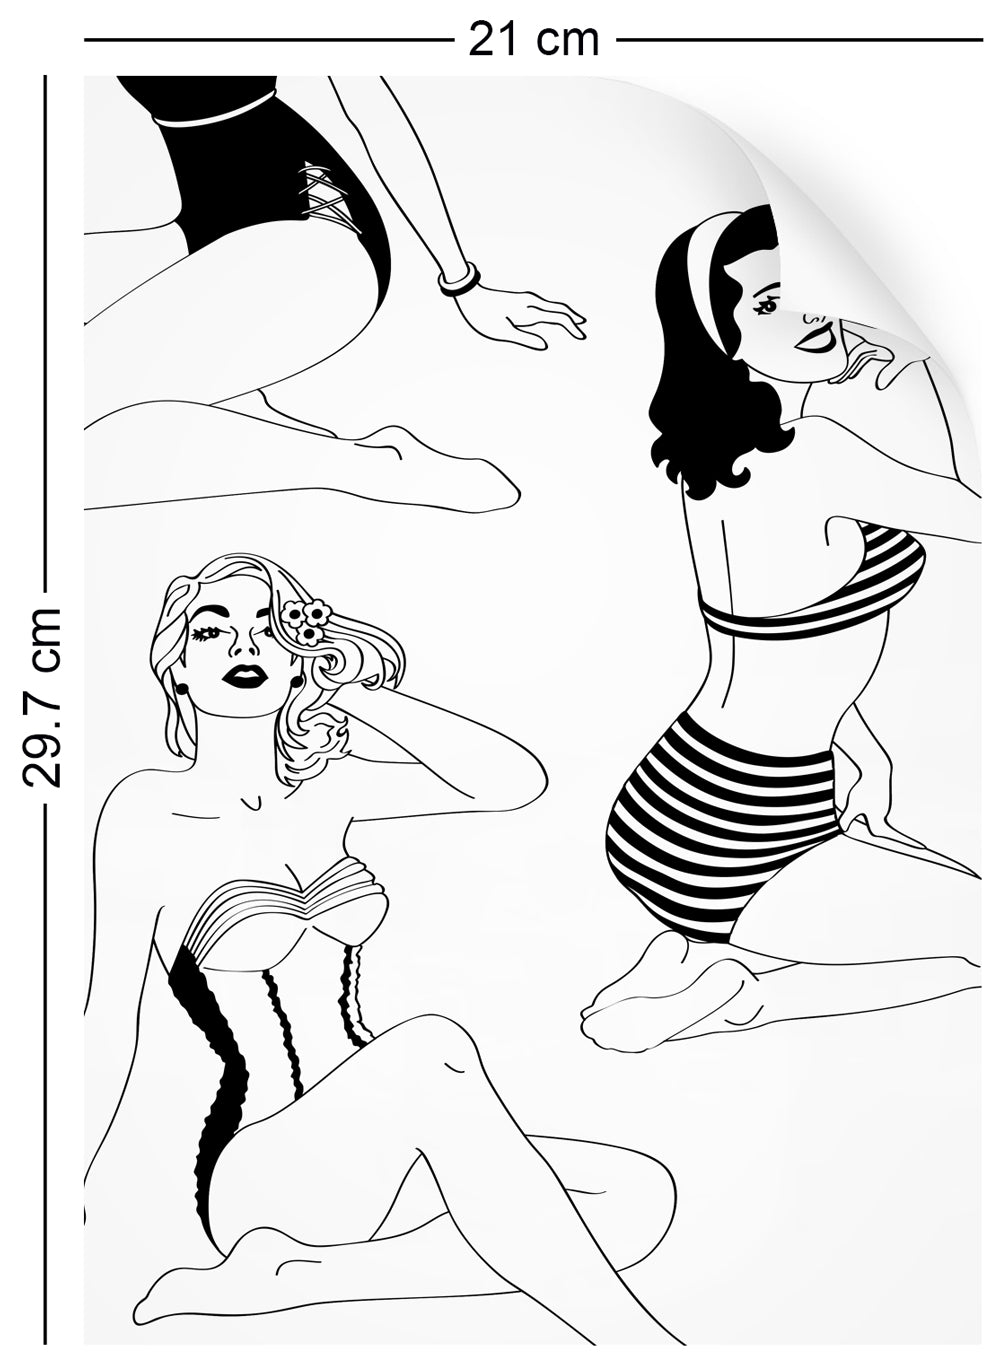 a4 wallpaper swatch with retro pinup girl design in monochrome